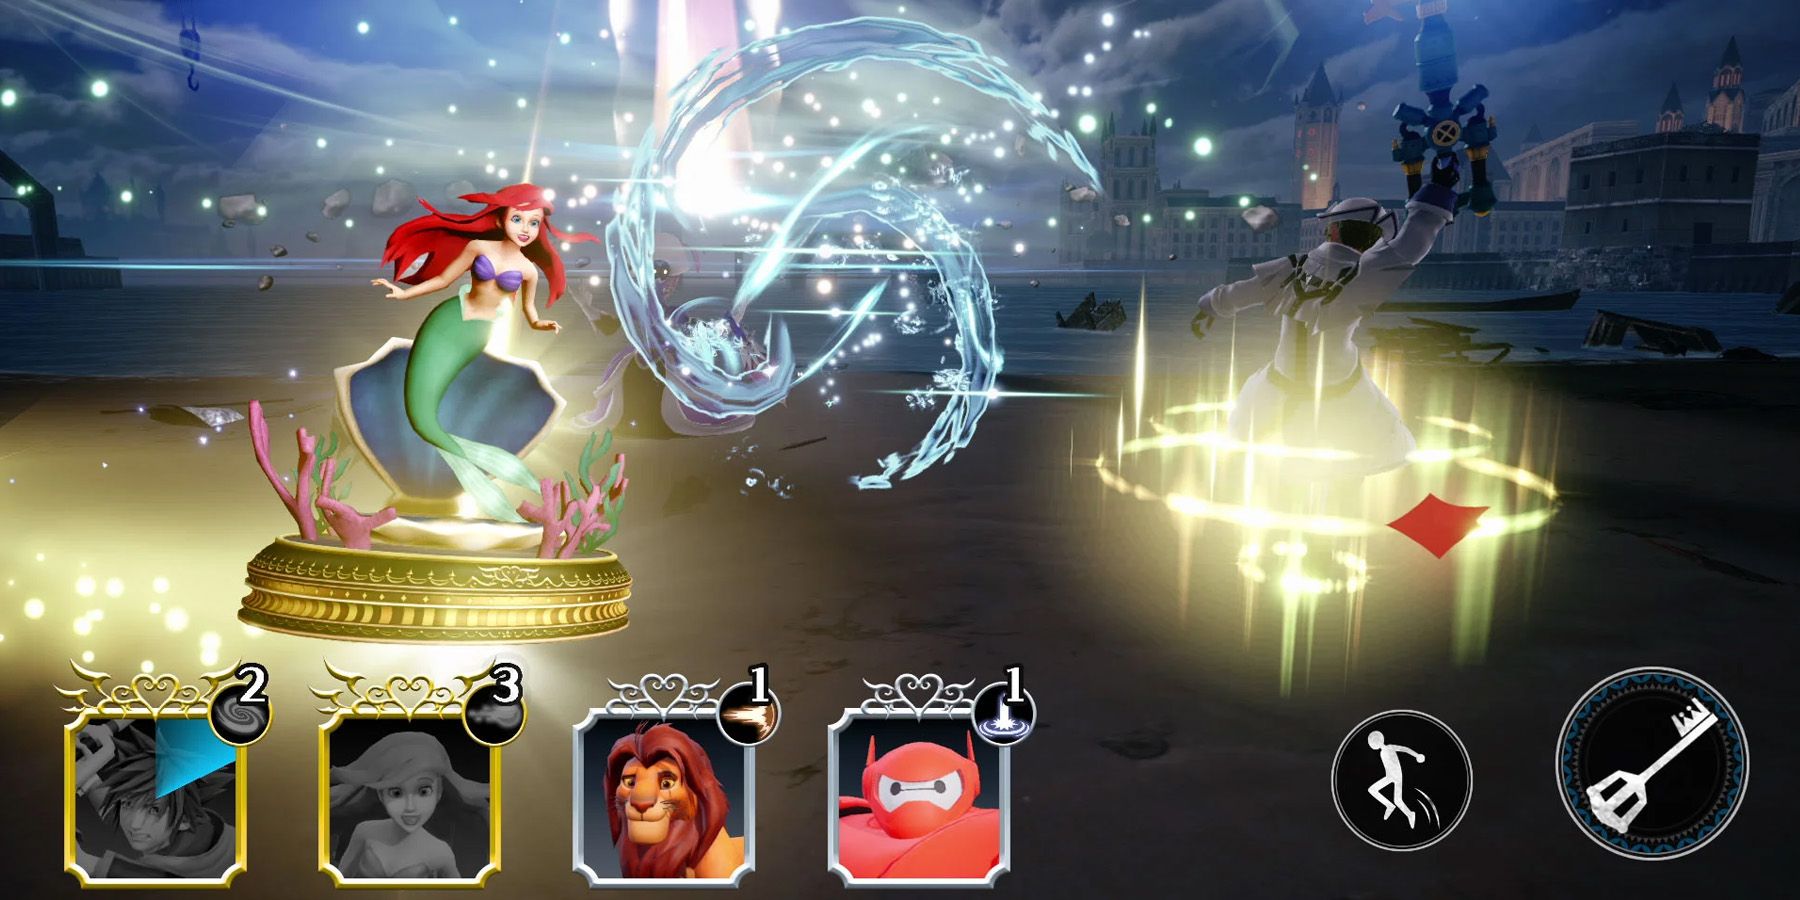 Kingdom Hearts: Missing Link – Beta, Gameplay, Story, & Release Date Details